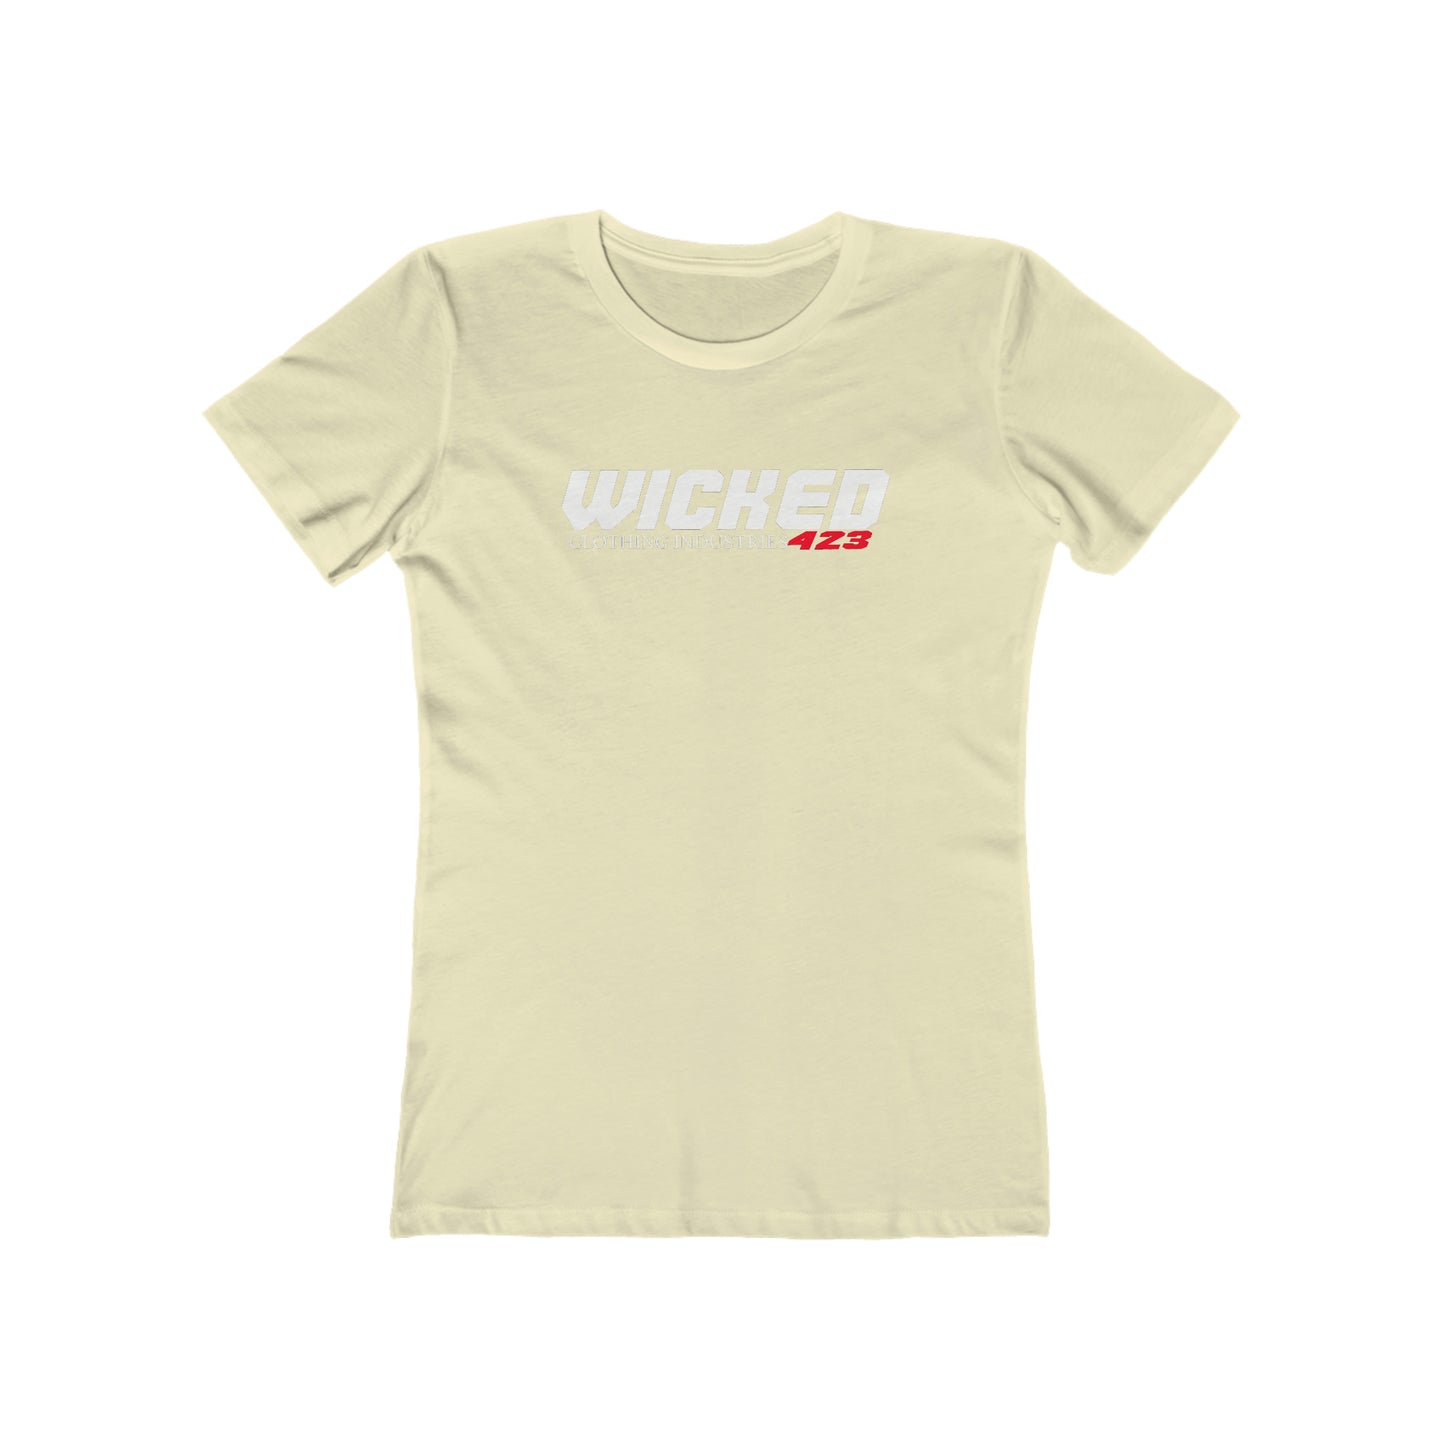 Wicked 423/ T-Shirt